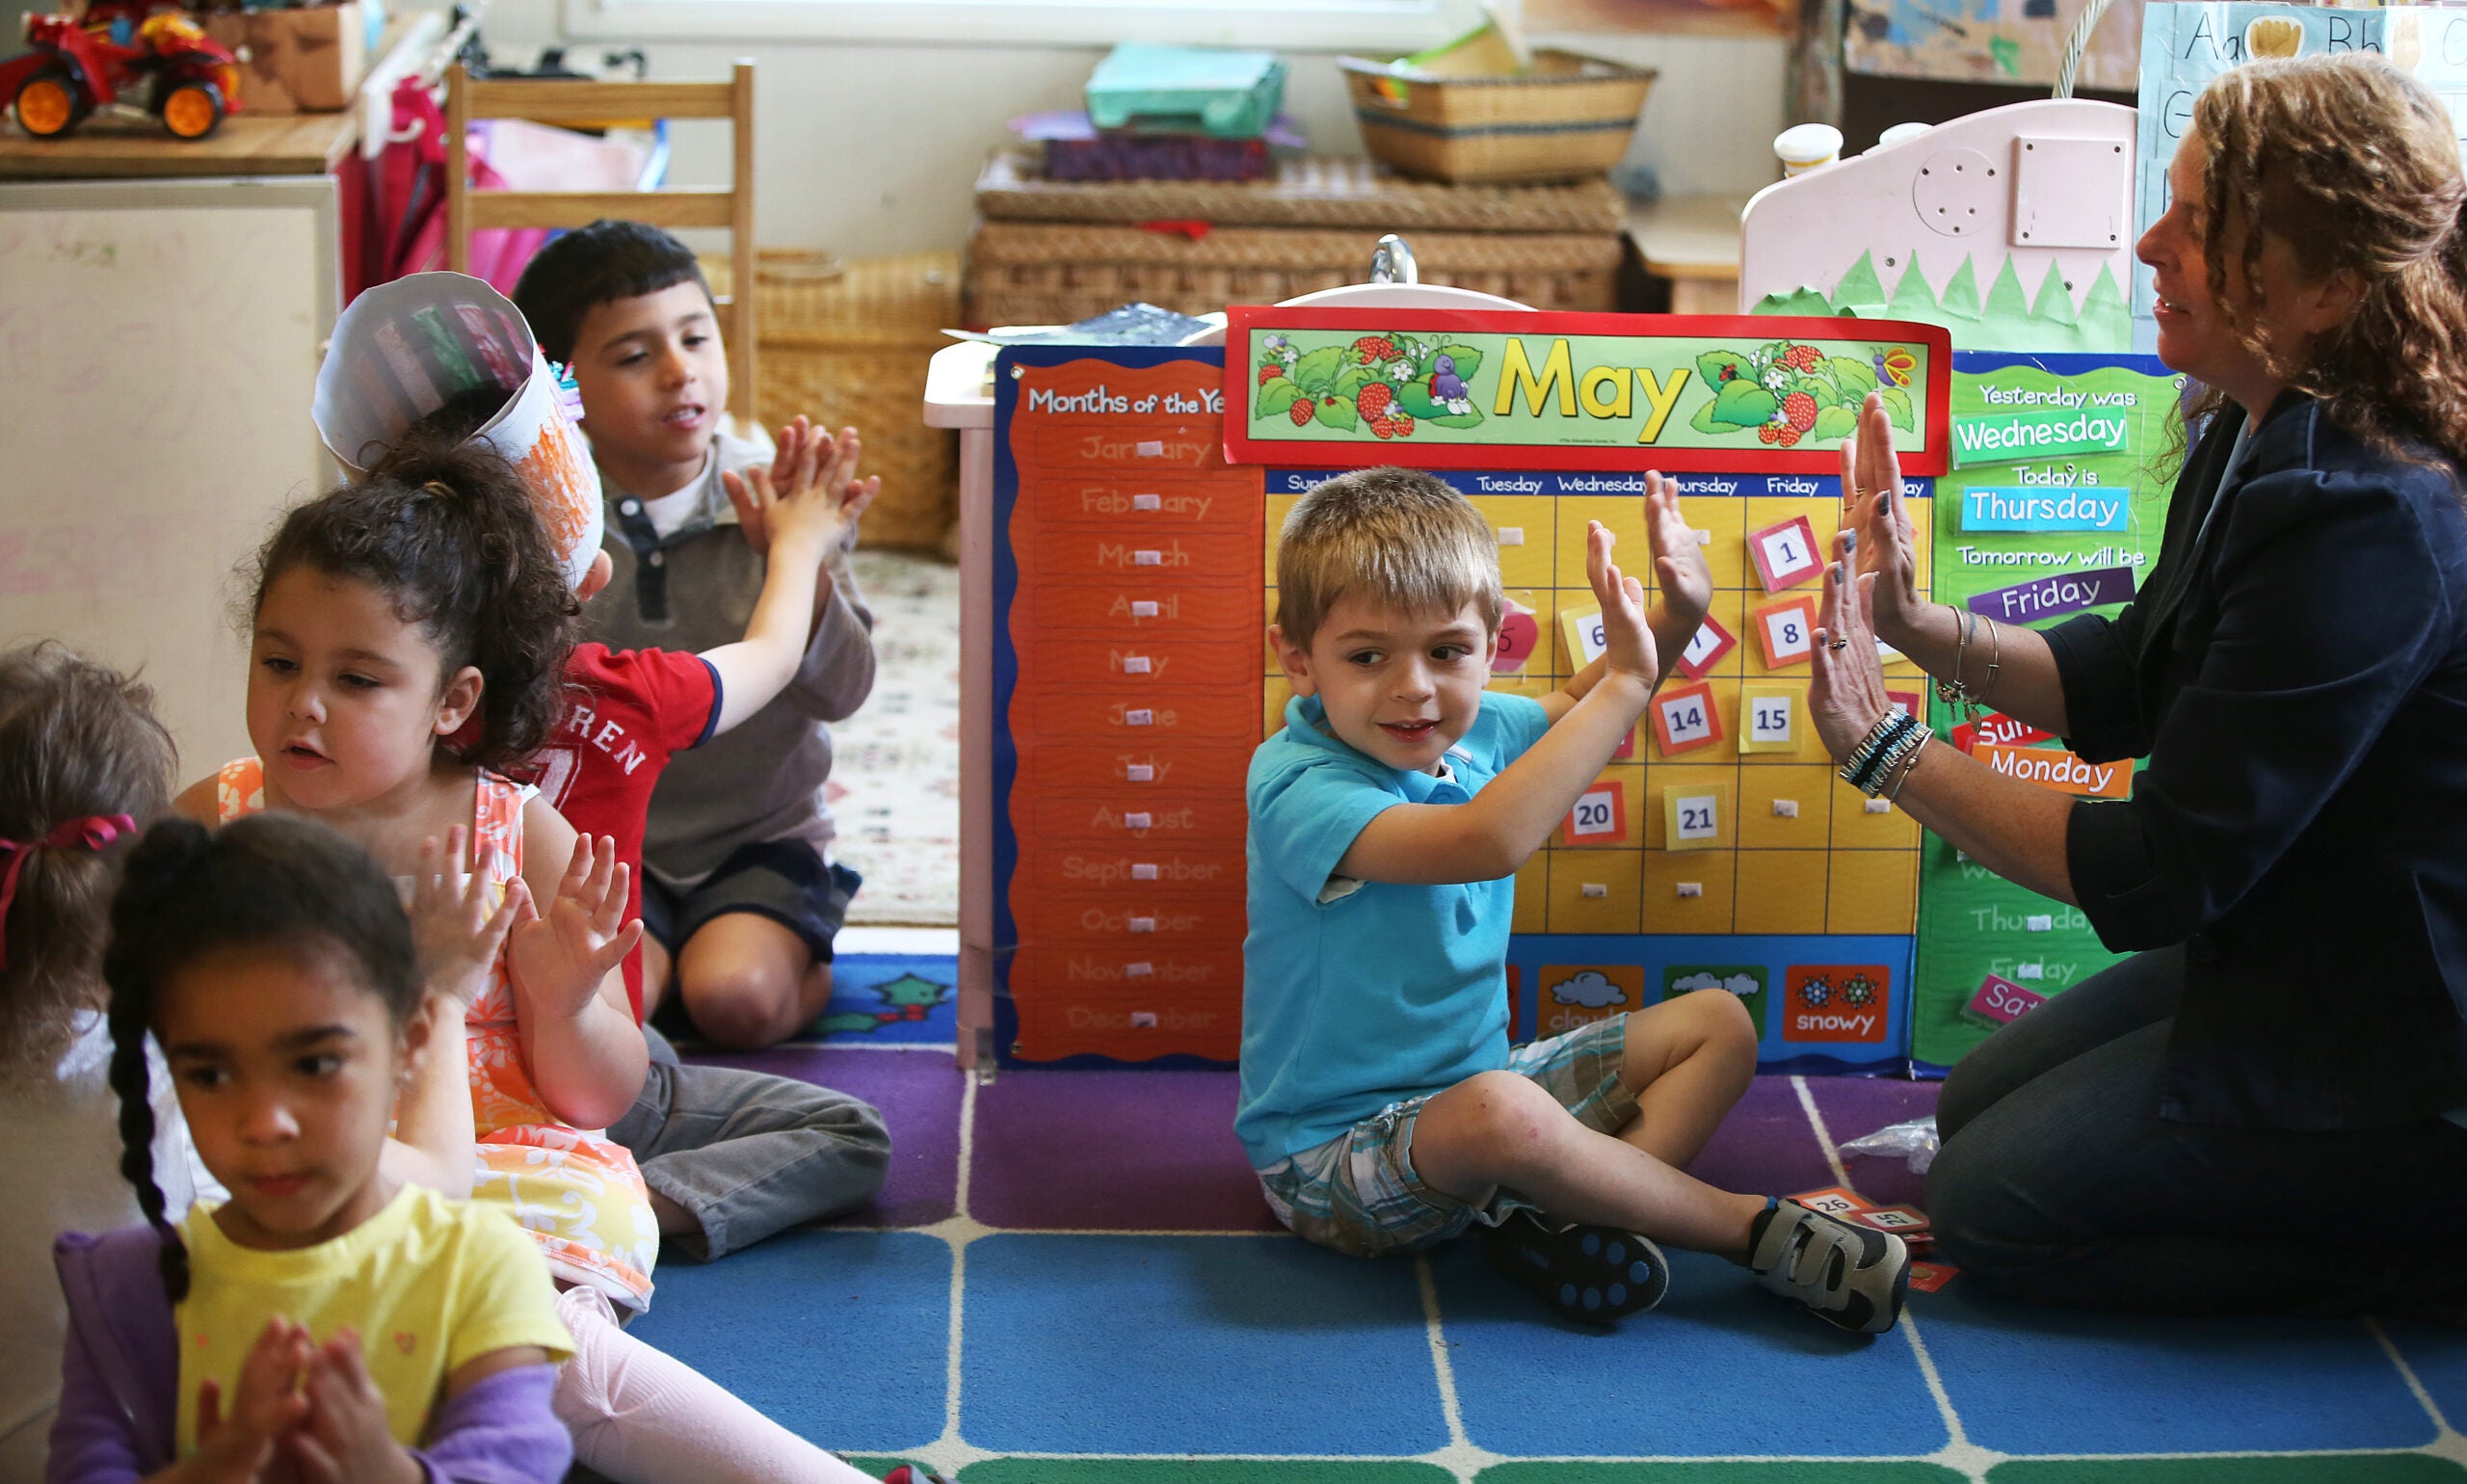 Jameson Pilling (cq), 3, claps with teacher Kerrelle Dow (cq). Little Discoveries provides child care in Brockton. A classroom with 3- to 5-year-olds is photographed, on Thursday, May 21, 2015.